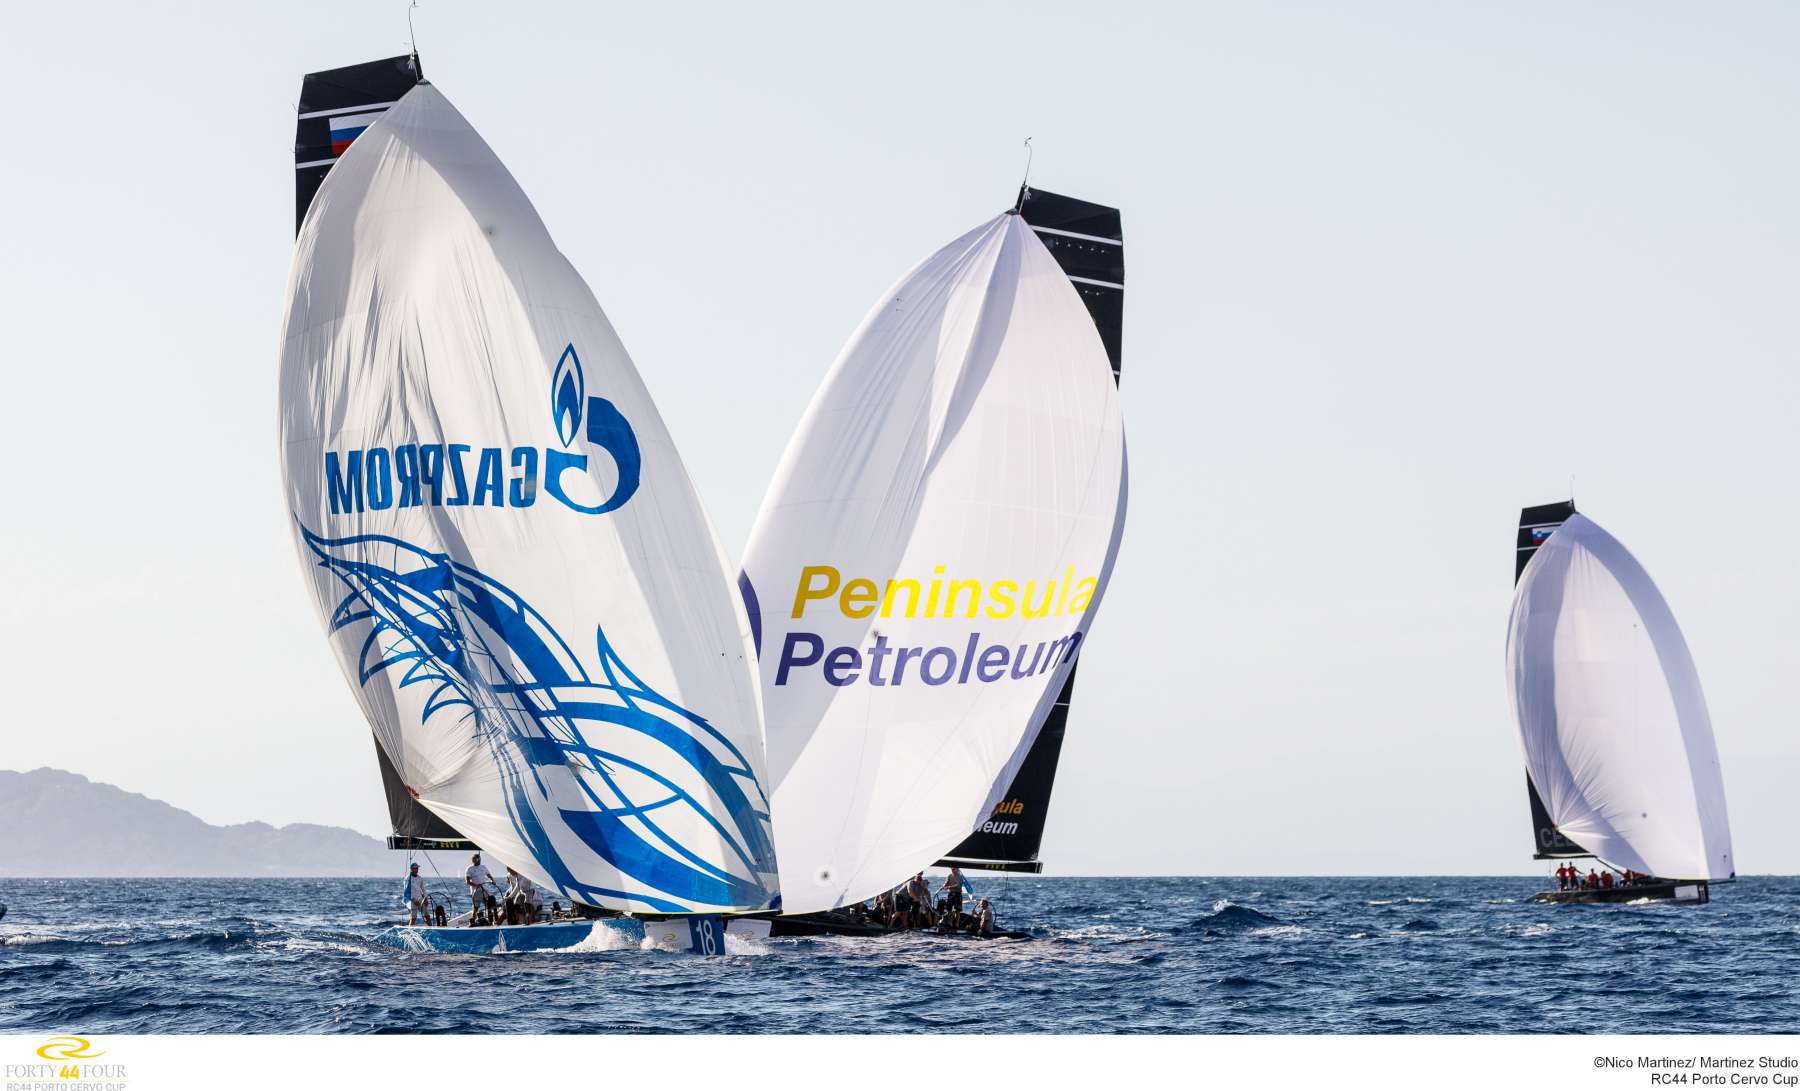  Peninsula Petroleum leads in the first day of racing - NEWS - Yacht Club Costa Smeralda